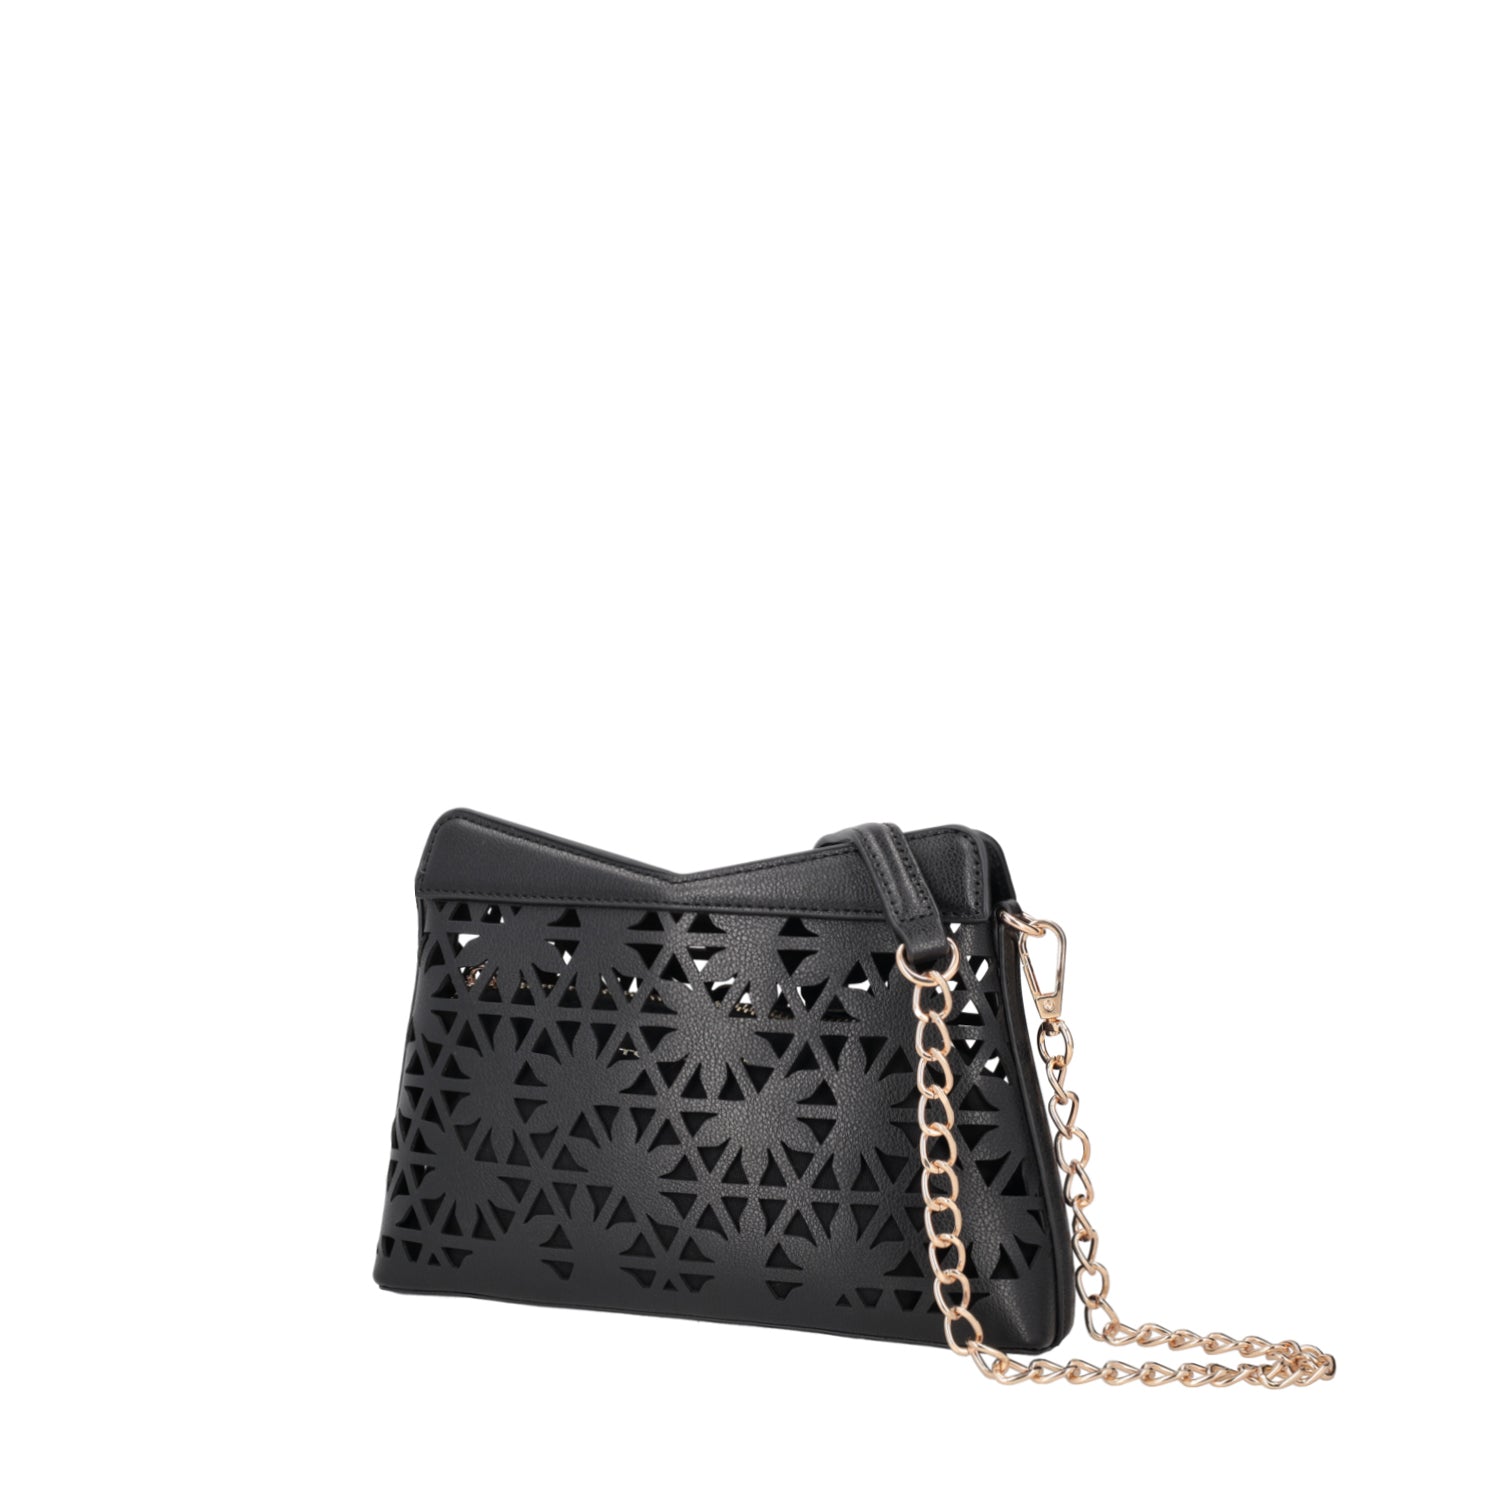 BLACK PEONIA LASERED CROSSBODY BAG WITH GOLD CHAIN